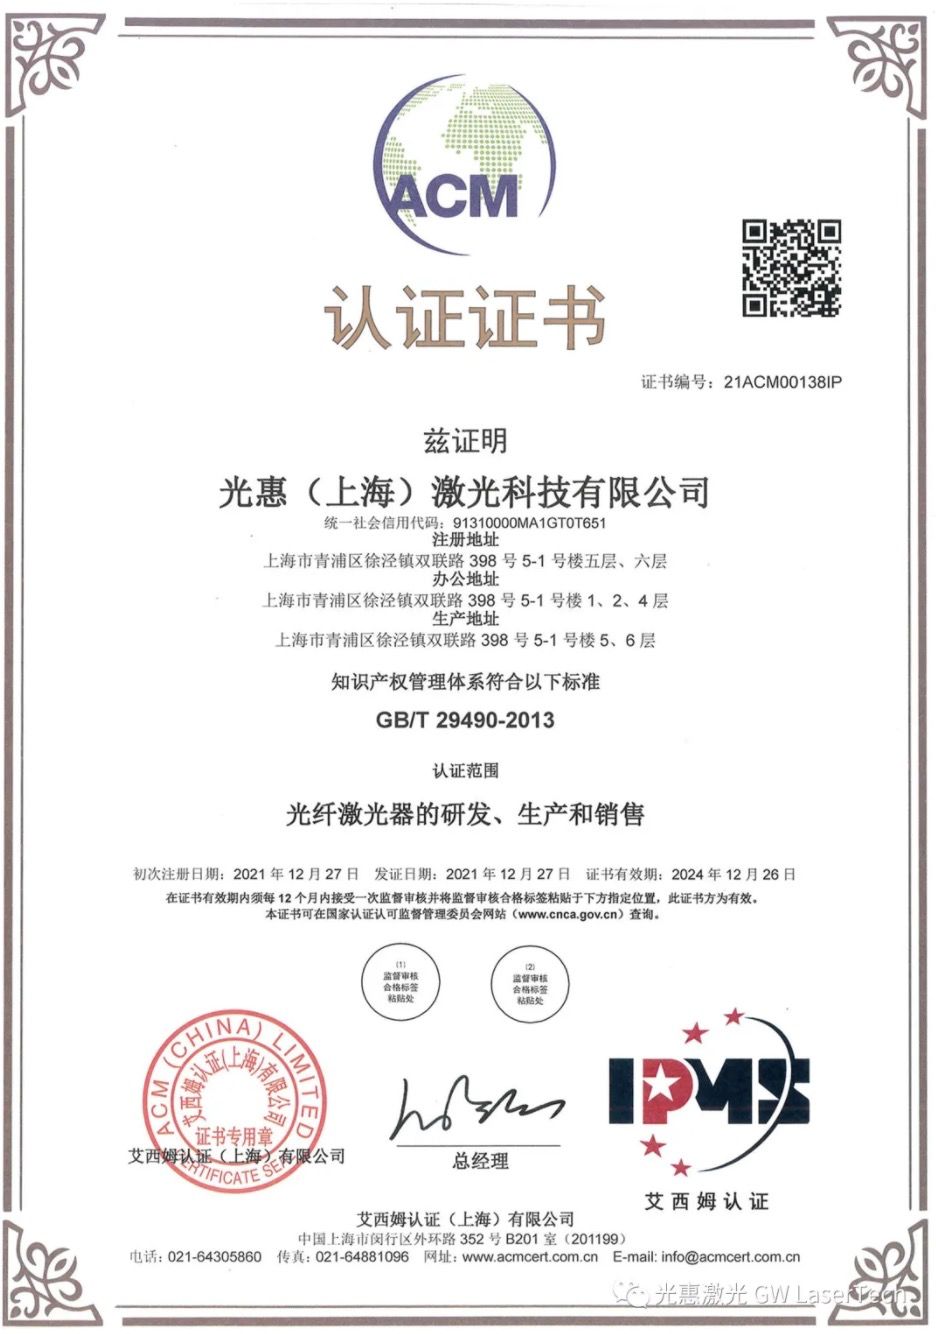 GW Laser obtained the intellectual property standard certification